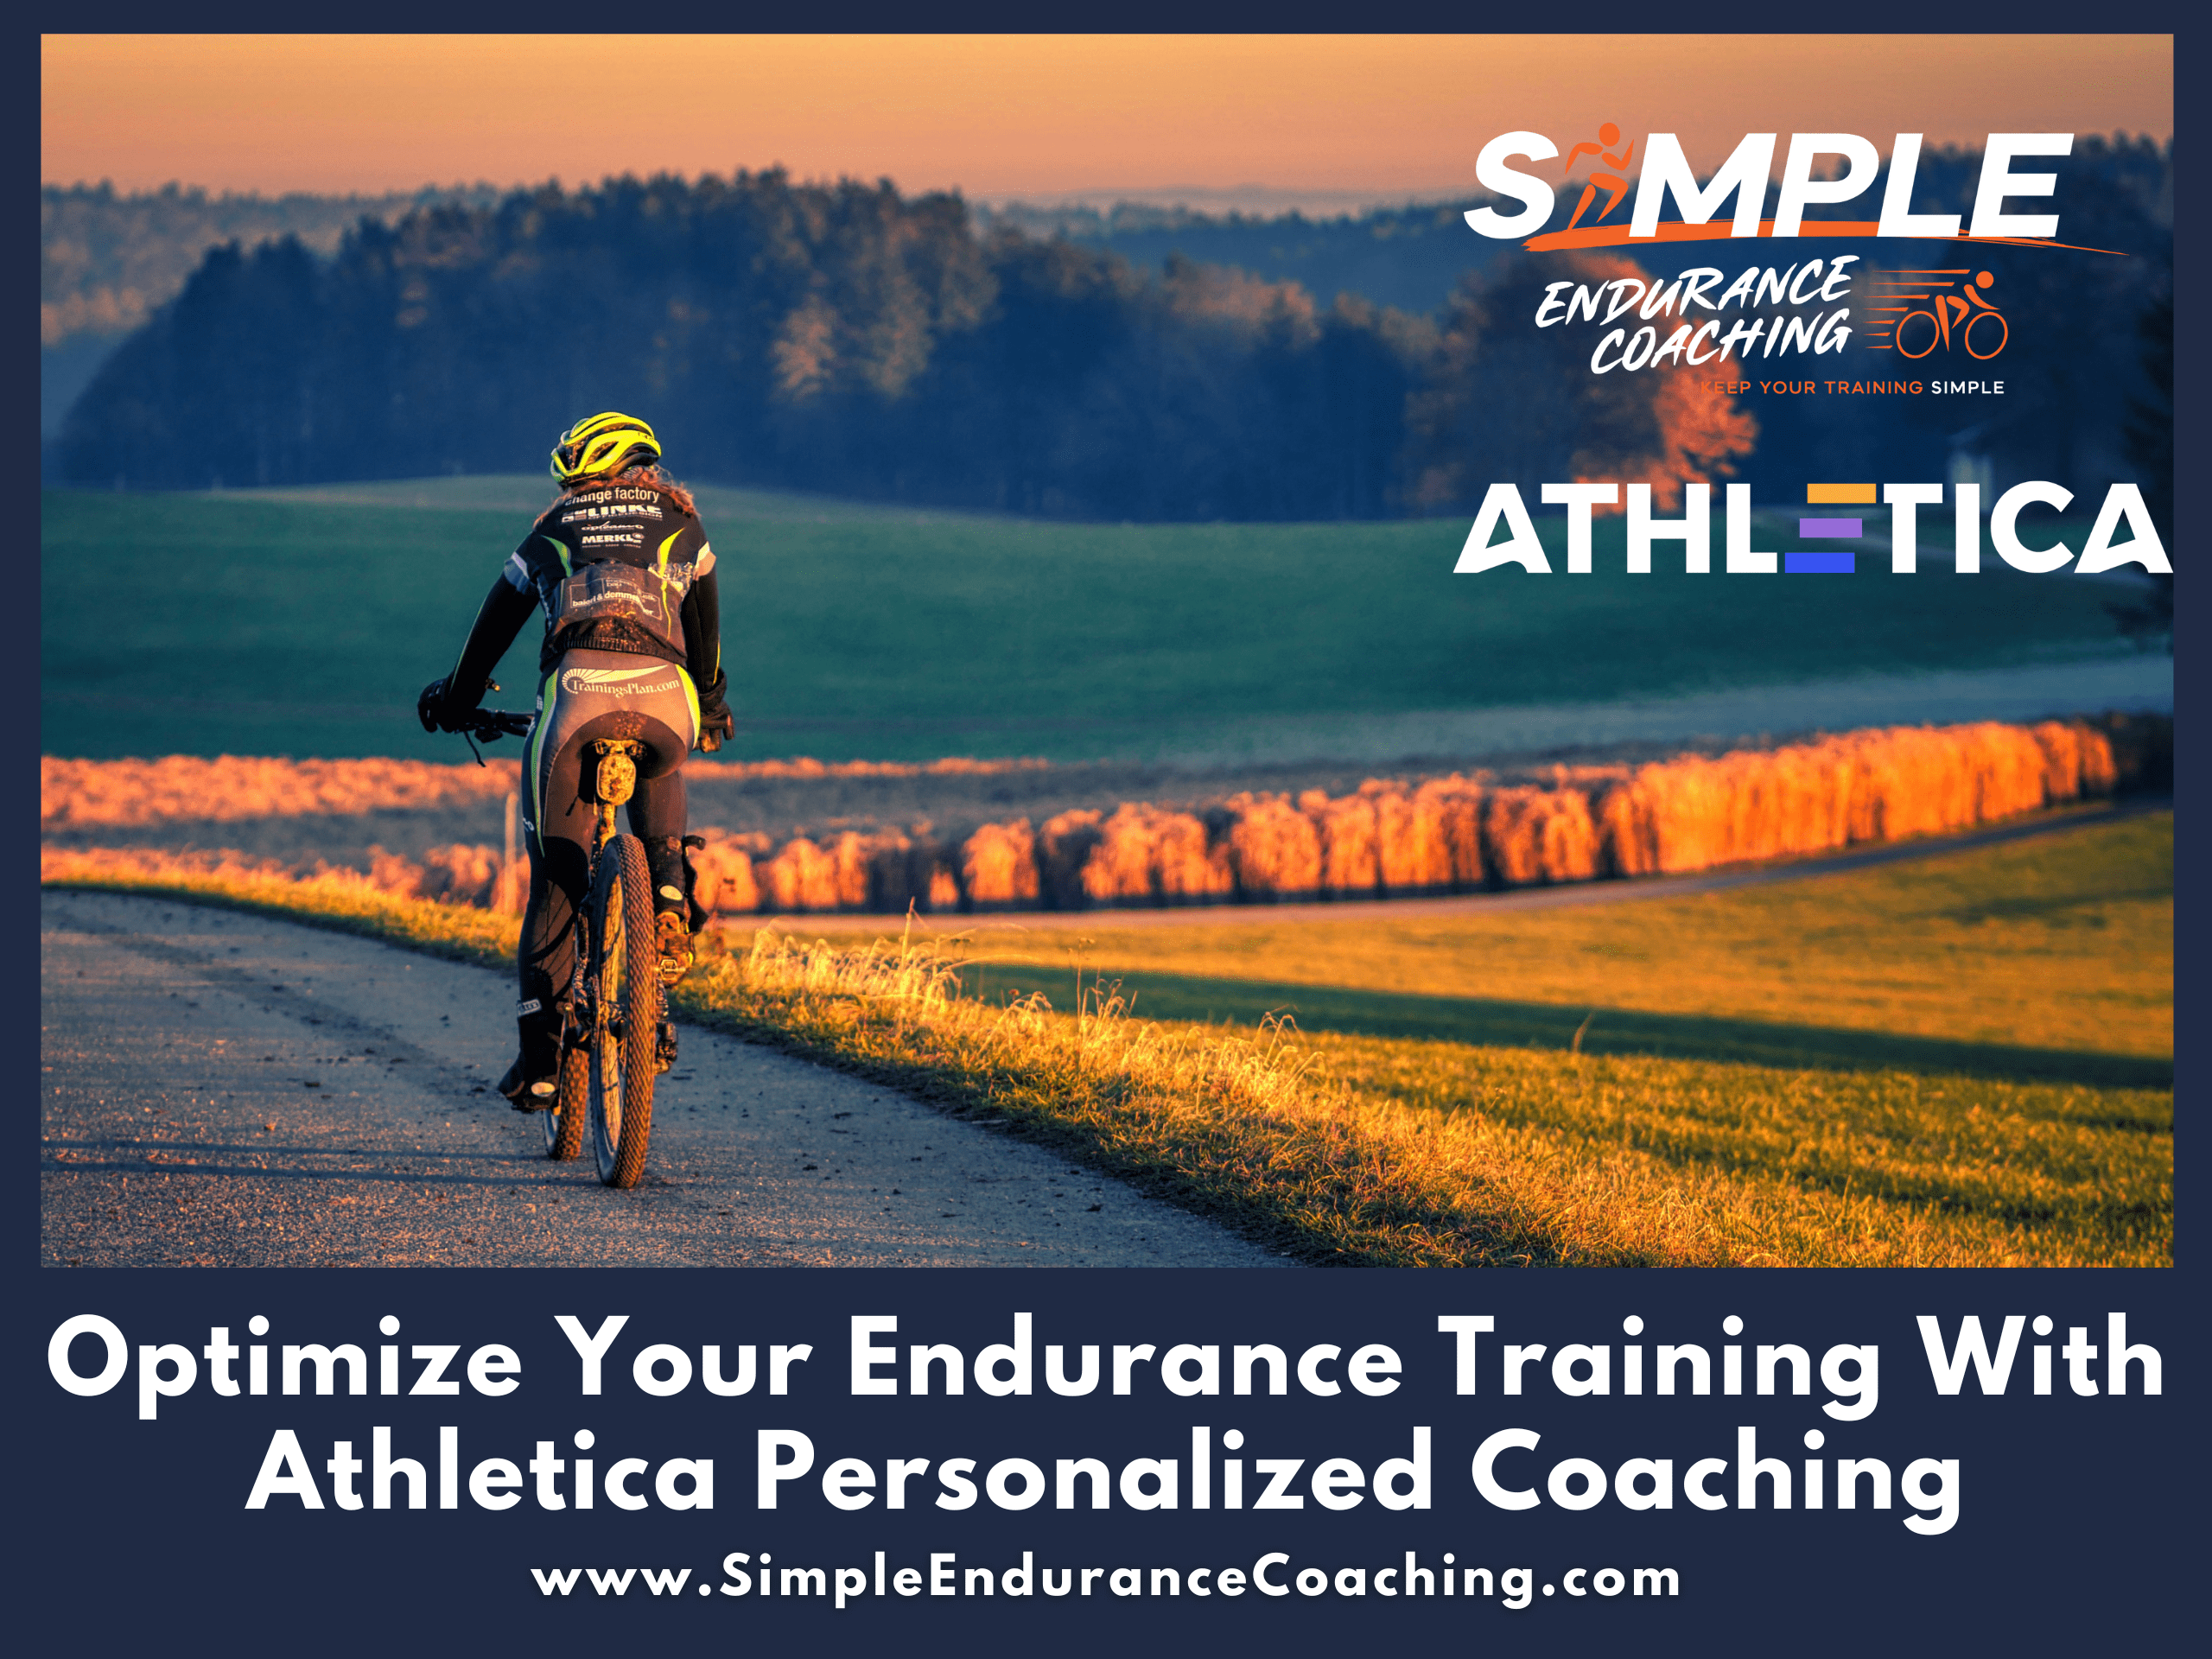 Explore Athletica's innovative approach to endurance training with Dynamic Adaptation, AI analysis, and personalized workouts for peak performance.